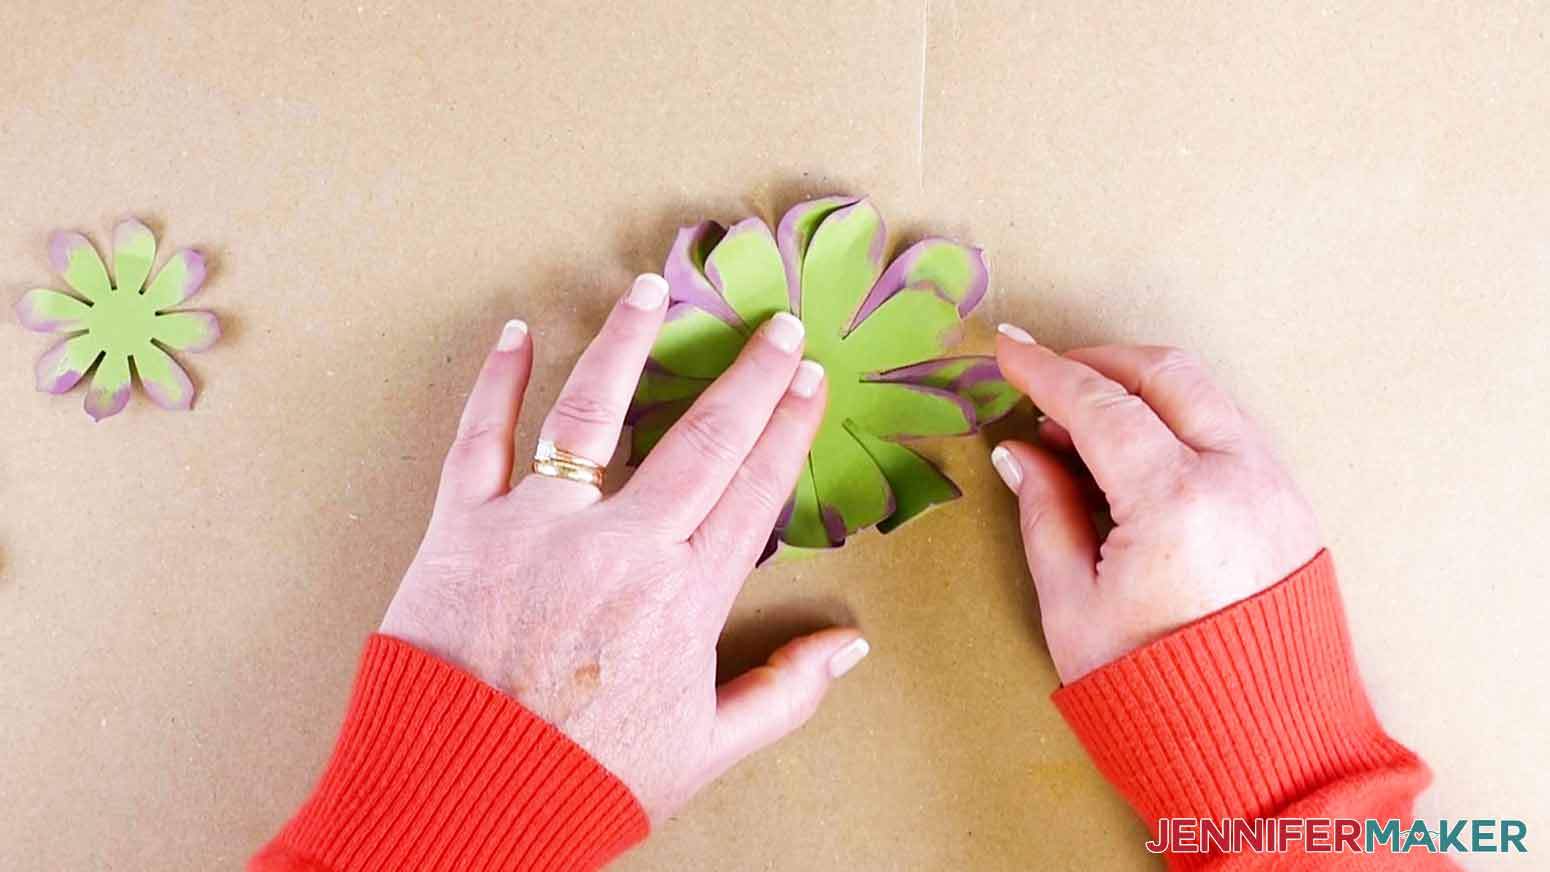 Assemble the succulent by staggering the pieces when making my paper succulent project